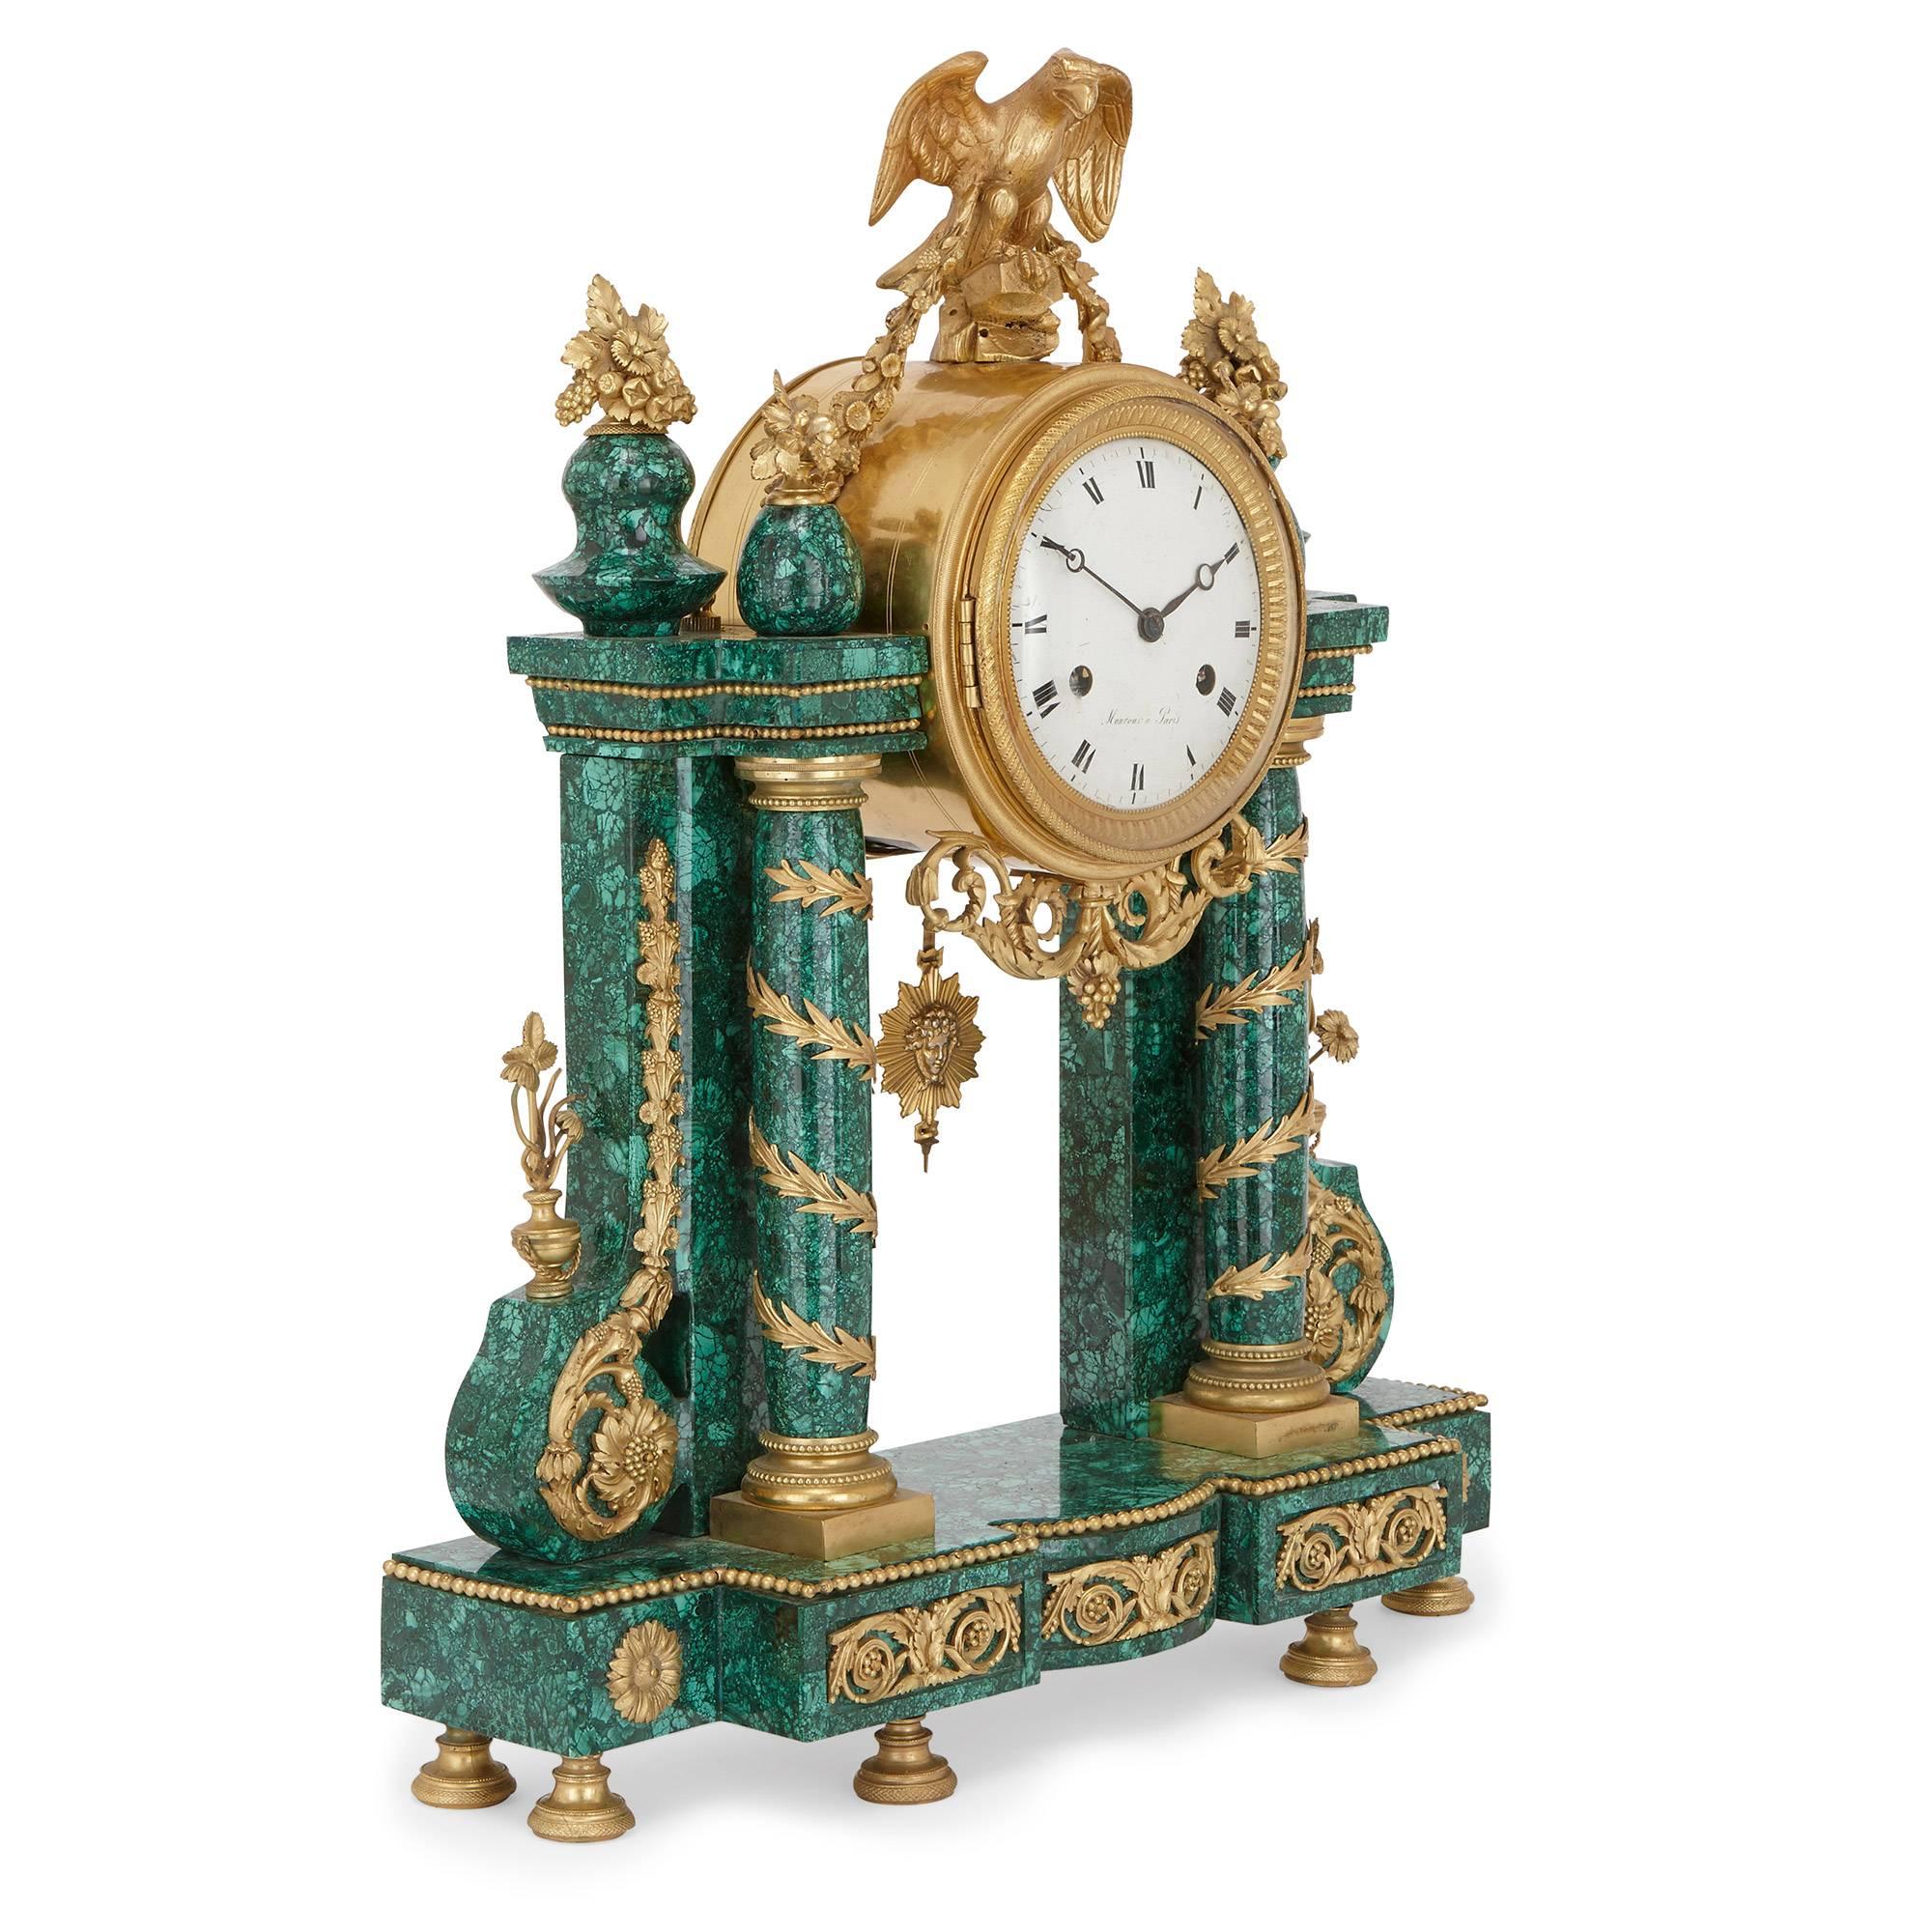 This exquisite antique mantel clock was originally retailed by the French firm Monroux, based in Paris. The work dates to the Louis XVI period, and is modelled in the refined neoclassical style. The clock's the central circular enamel dial is